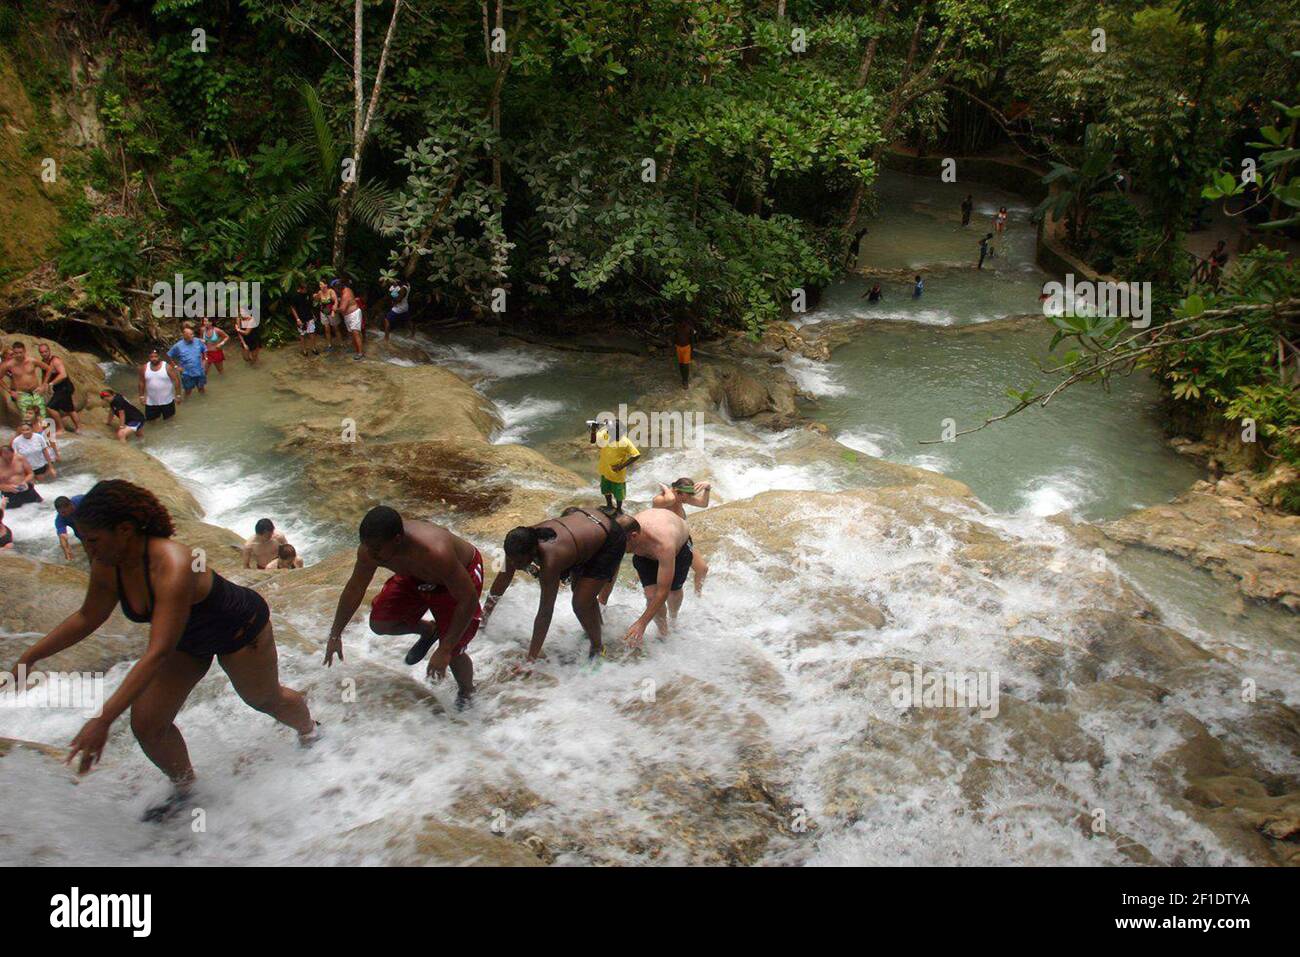 Climbing Dunn's River Falls is one of the top attractions at Ocho Rios in Jamaica. The country reopened its international airports Monday. (Photo by Tom Uhlenbrock/St. Louis Post-Dispatch/TNS/Sipa USA) Stock Photo